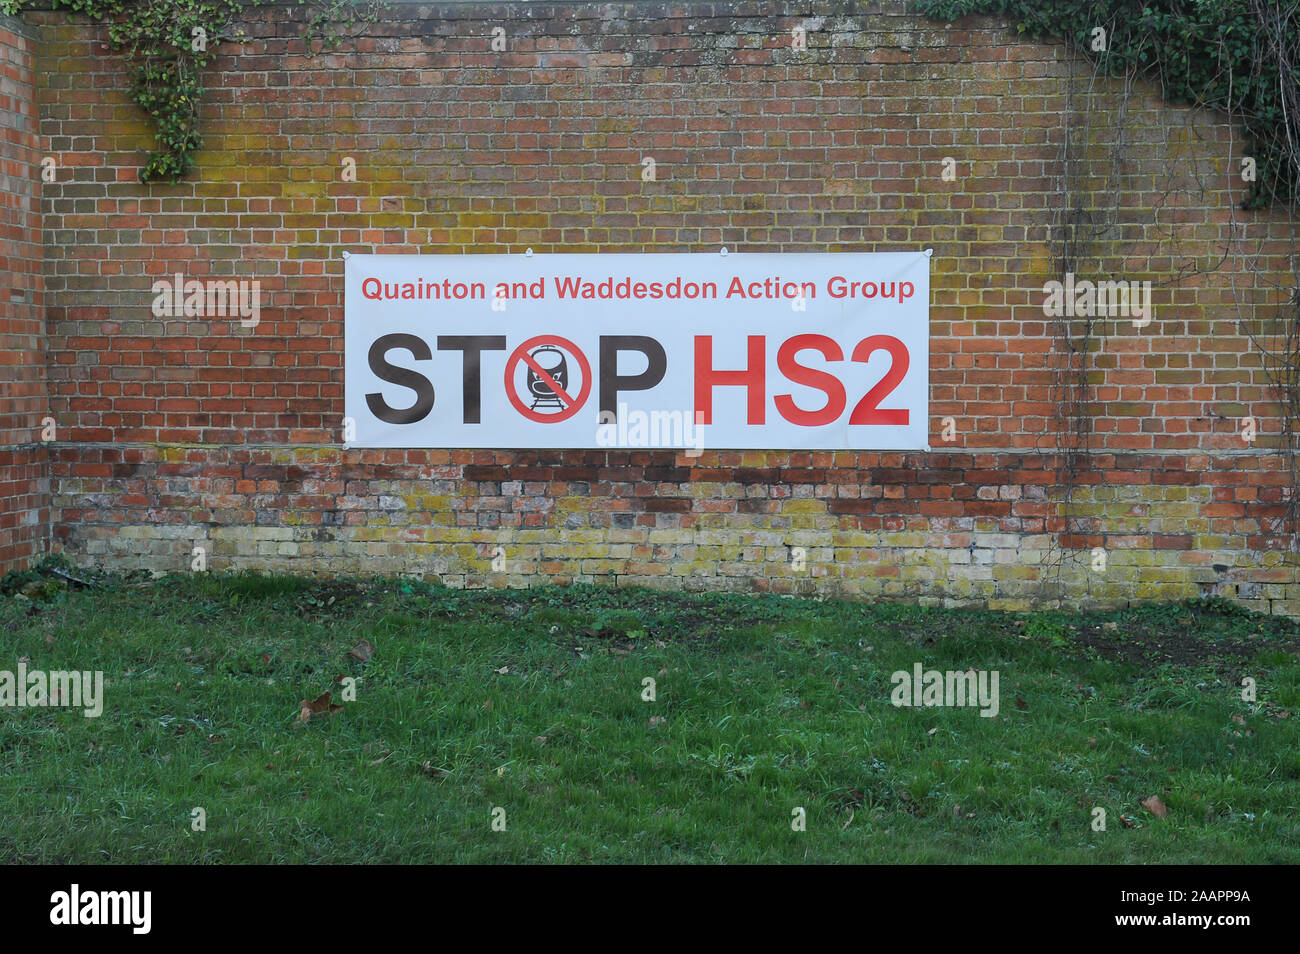 HS2 opposition sign near Waddesdon in Buckinghamshire, UK. 1st February, 2012. A number of High Speed Railway HS2 opposition signs have been placed in fields and on buildings in the county of Buckinghamshire. Many local residents are opposed to the planned HS2 High Speed Rail link from London to Birmingham as it is expected to result in the destruction of countryside, rural habitats and ancient woodlands. Credit: Maureen McLean/Alamy Stock Photo